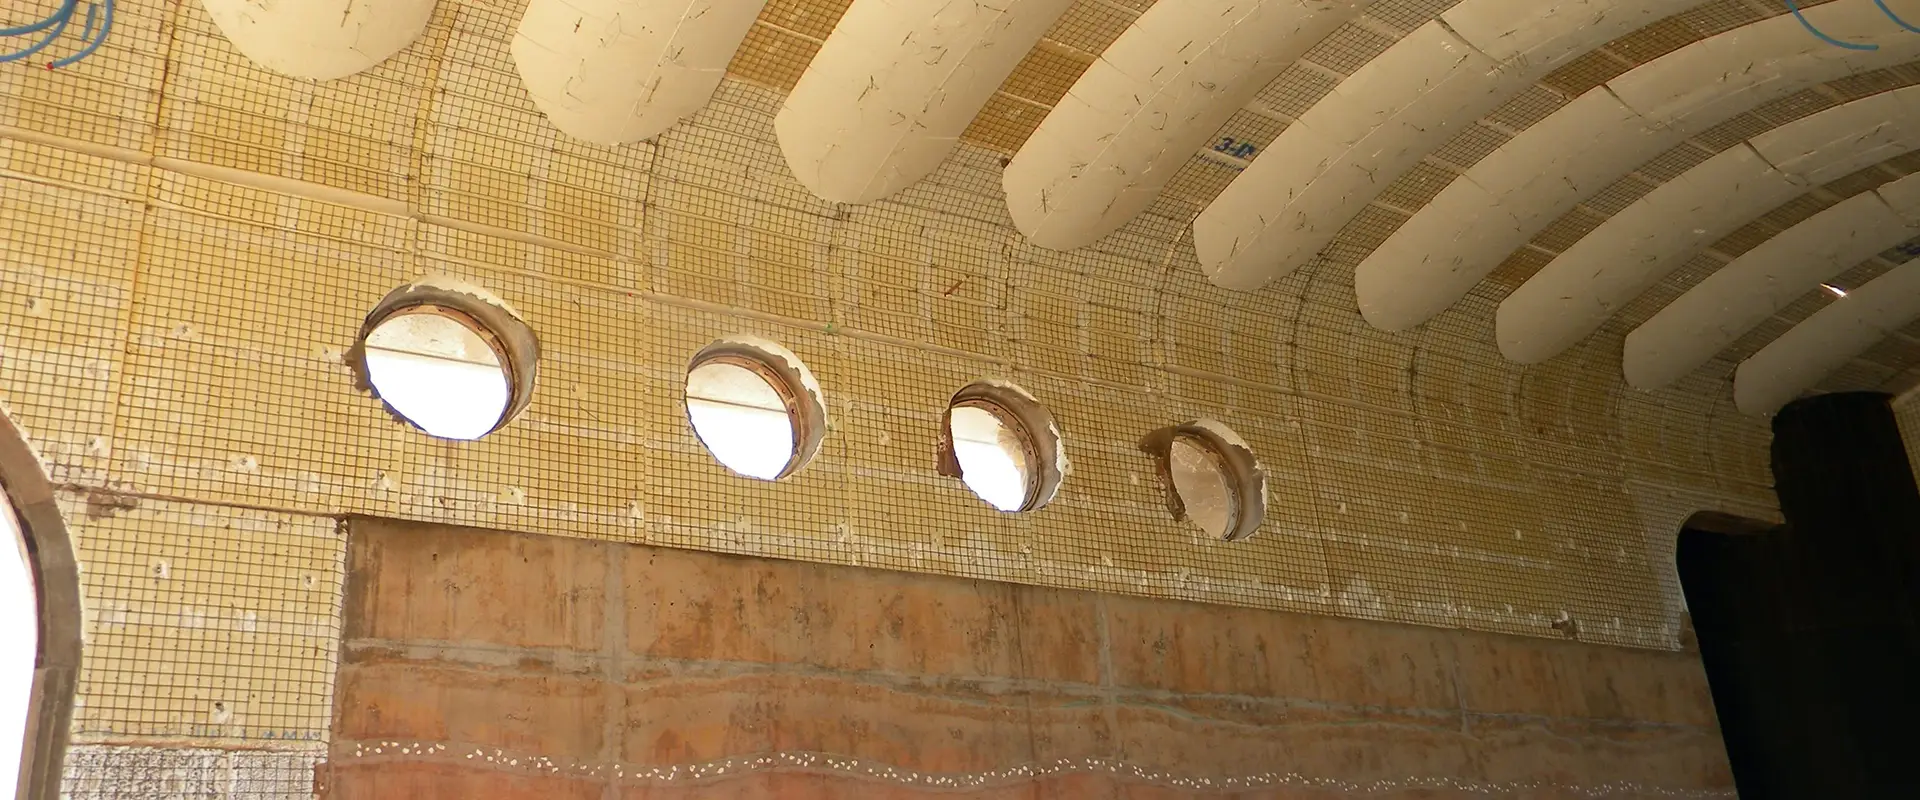 A close-up of a tiled ceiling with circular openings.